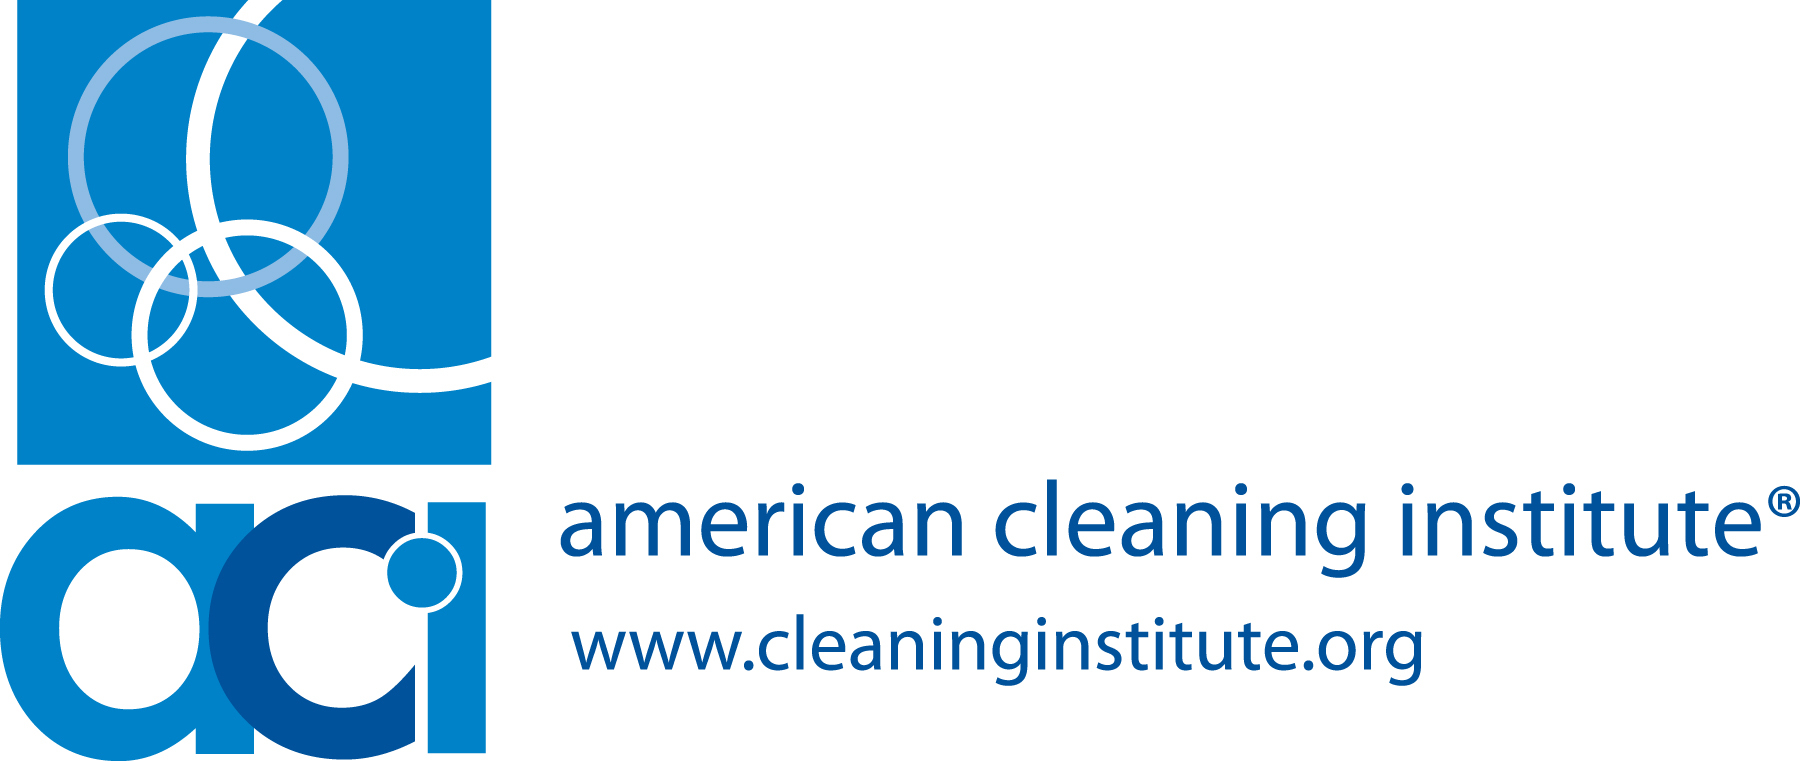 American Cleaning Institute Launches “C is For Clean” Toolkit